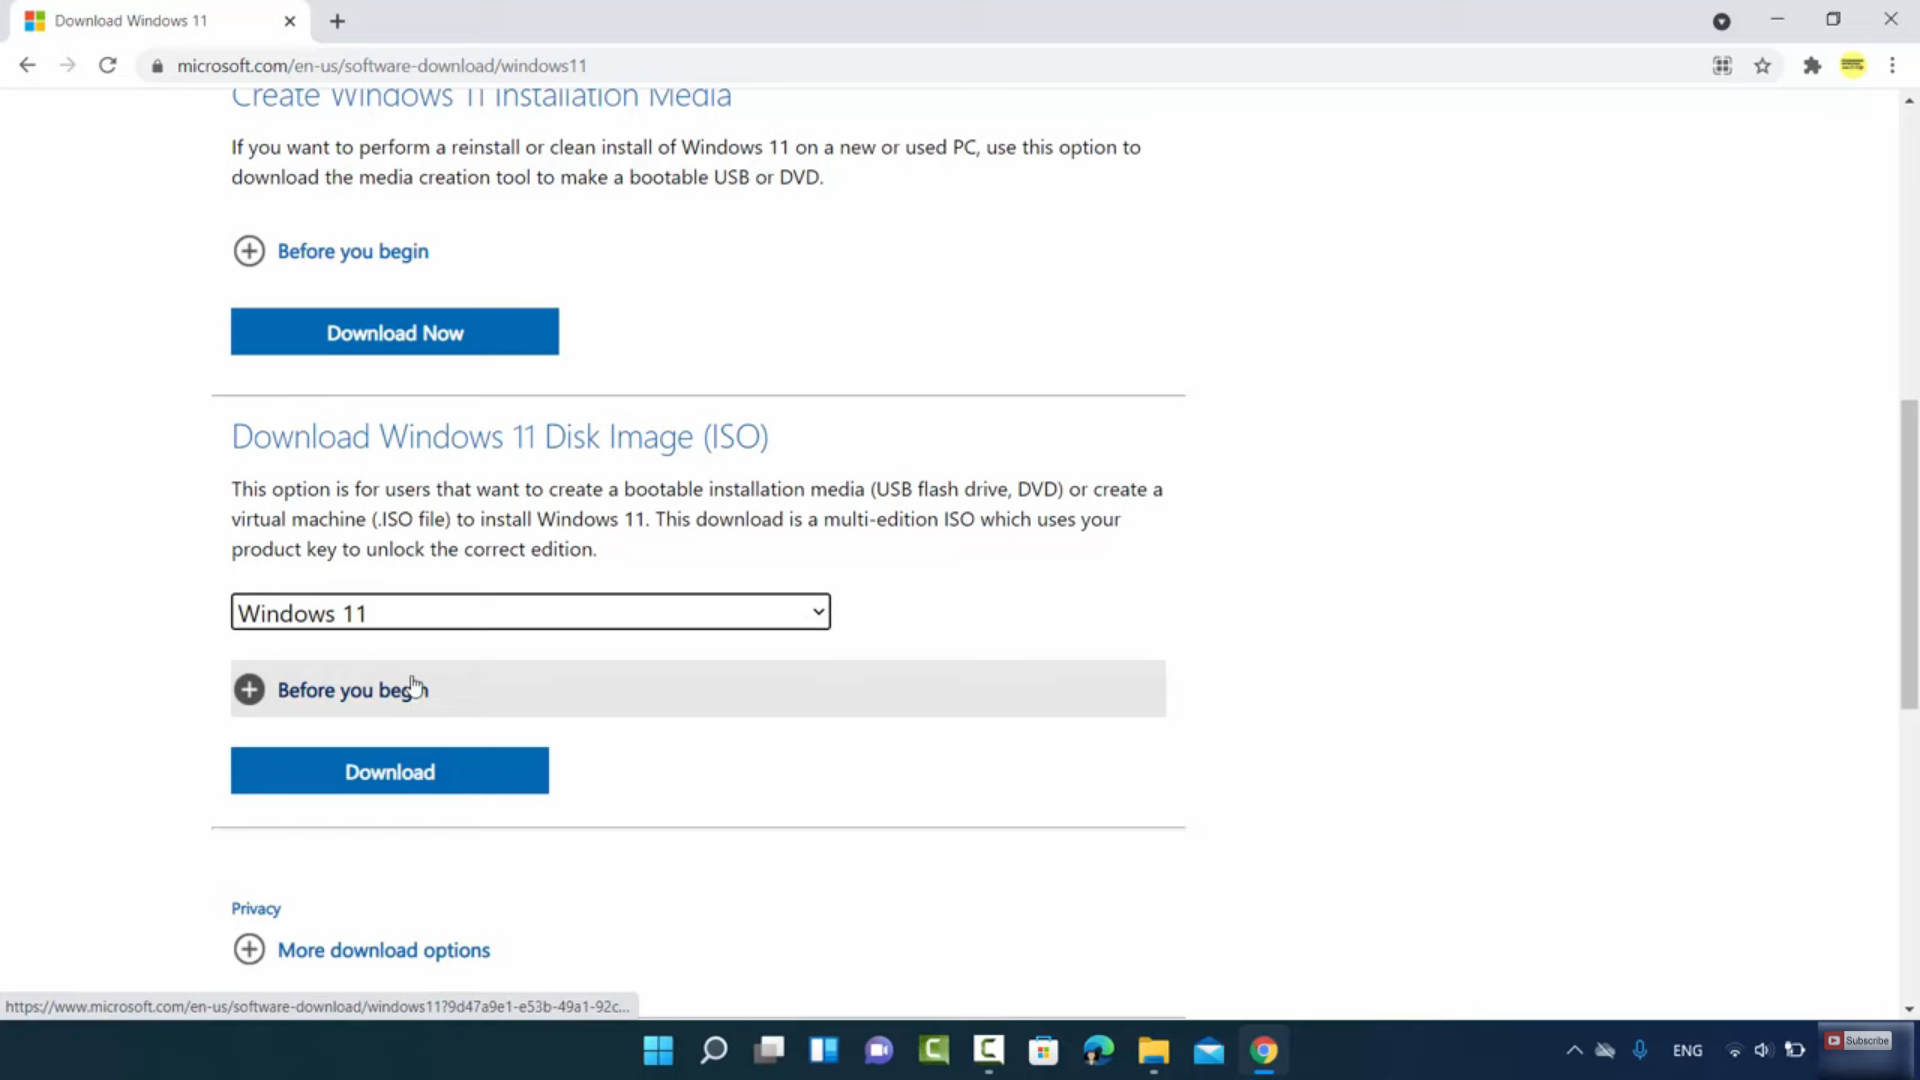 How to Download Windows 11 ISO File